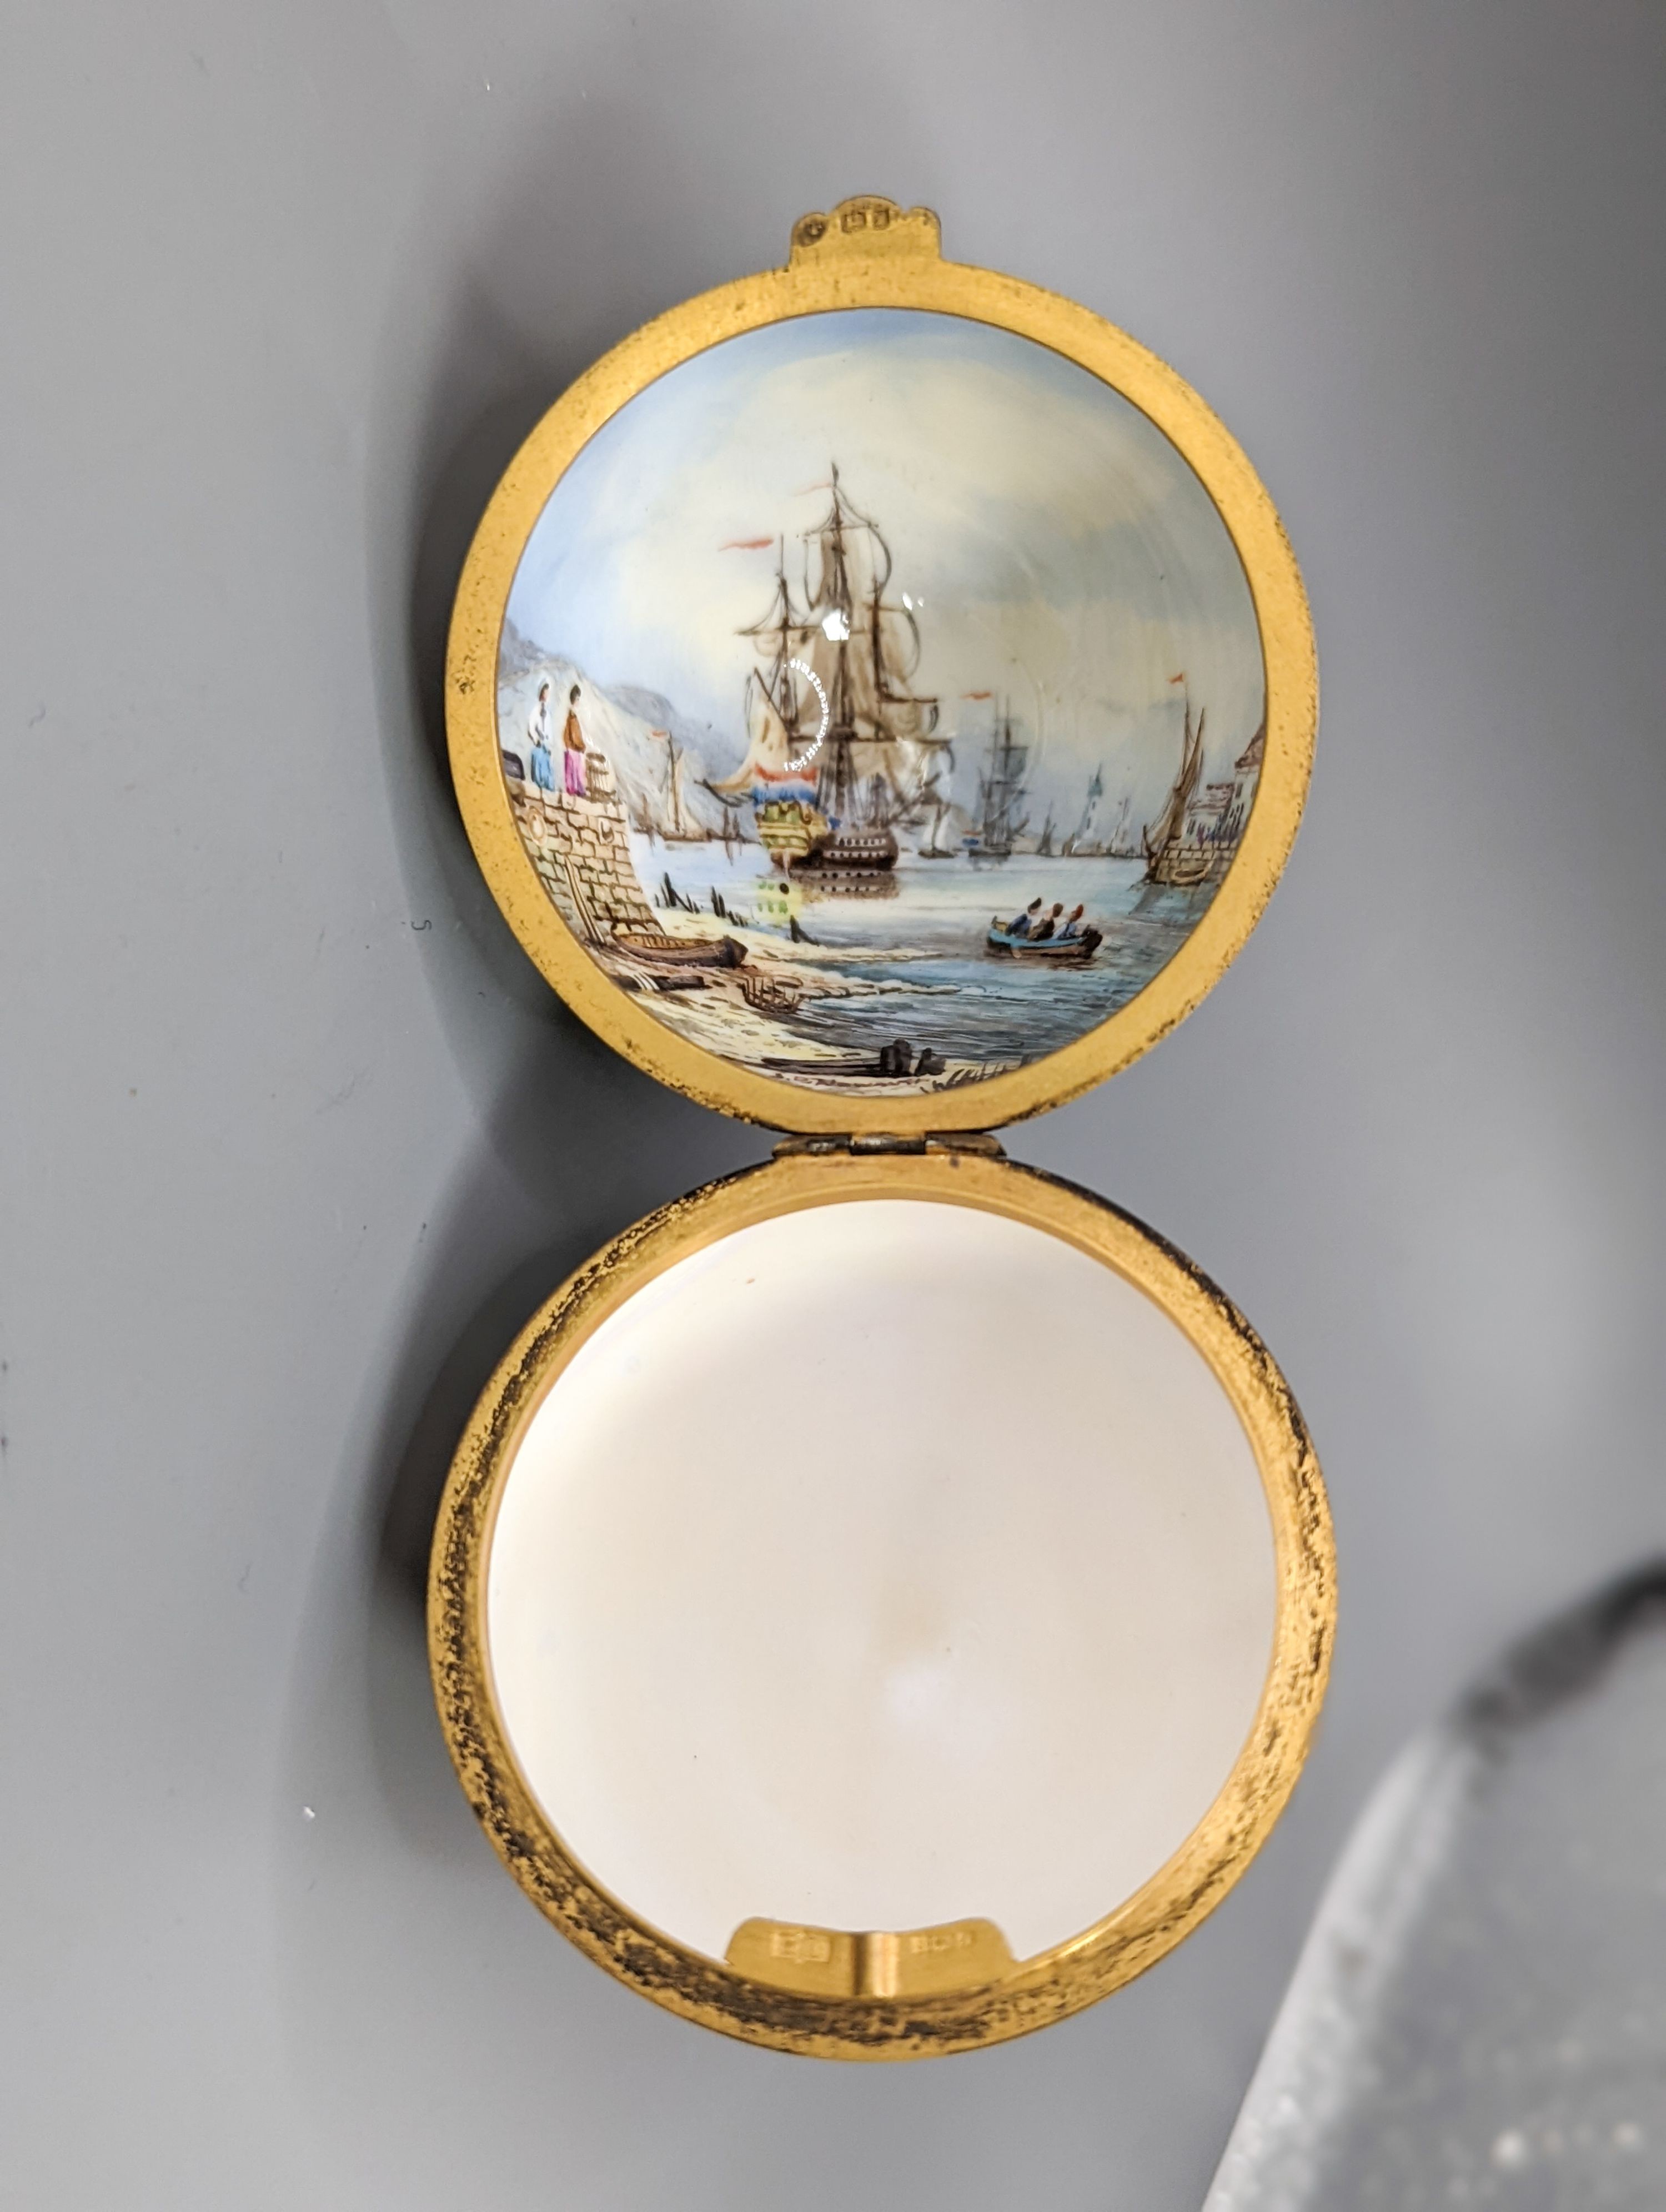 Two silver gilt mounted enamelled eggs with interior seascapes, on silver gilt stands, Birmingham, 1985 & 7 and a smaller similar gilt metal mounted zodiac egg, tallest 8.5cm